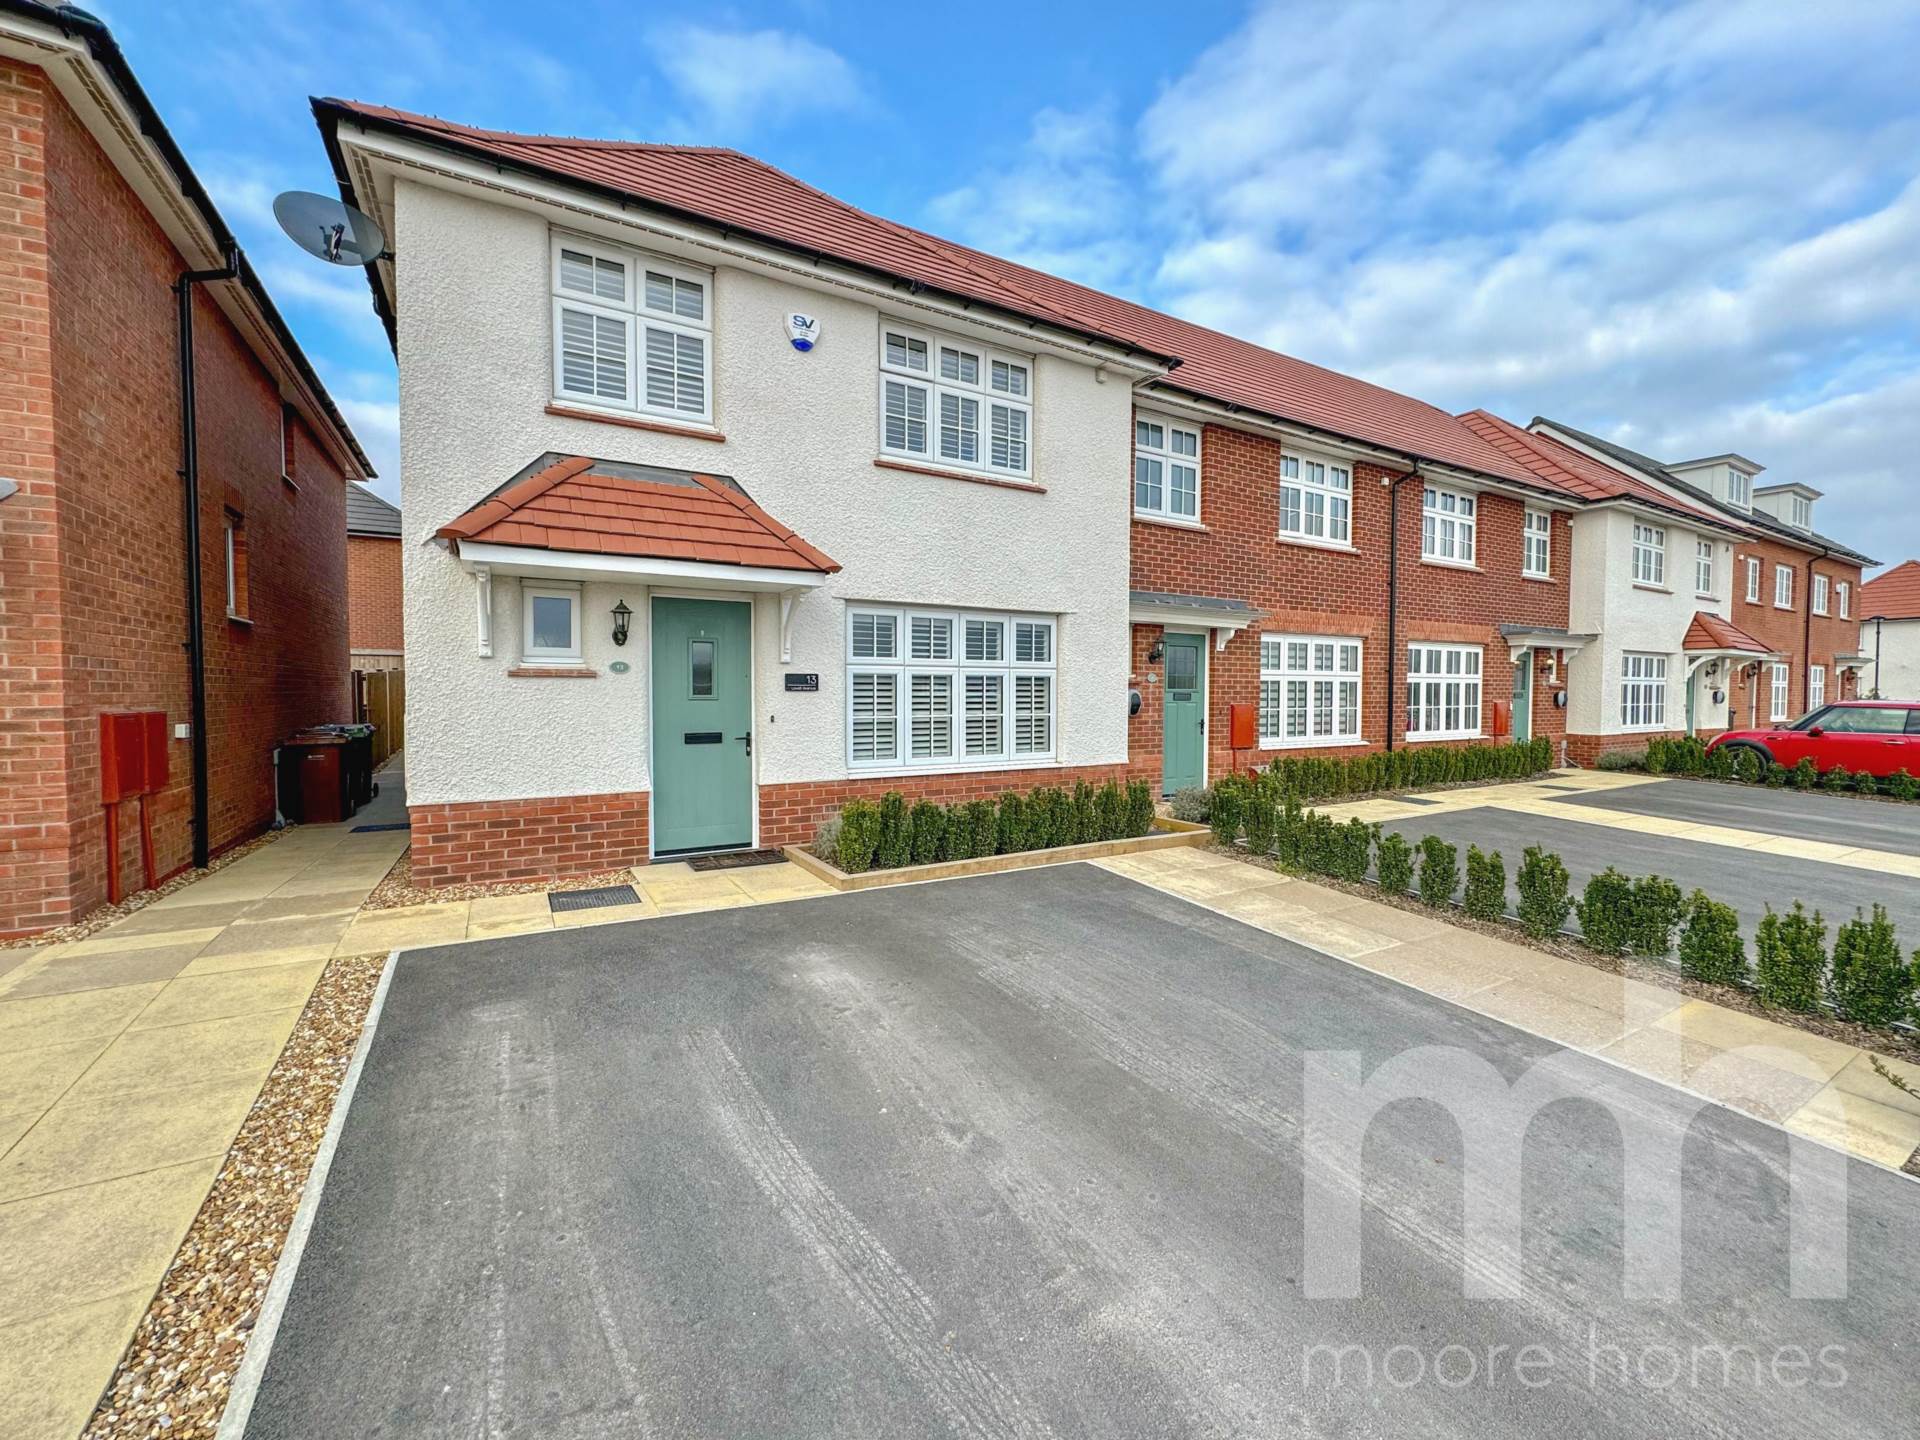 LOVELL AVENUE, Woodford SK7 1TB, Image 1